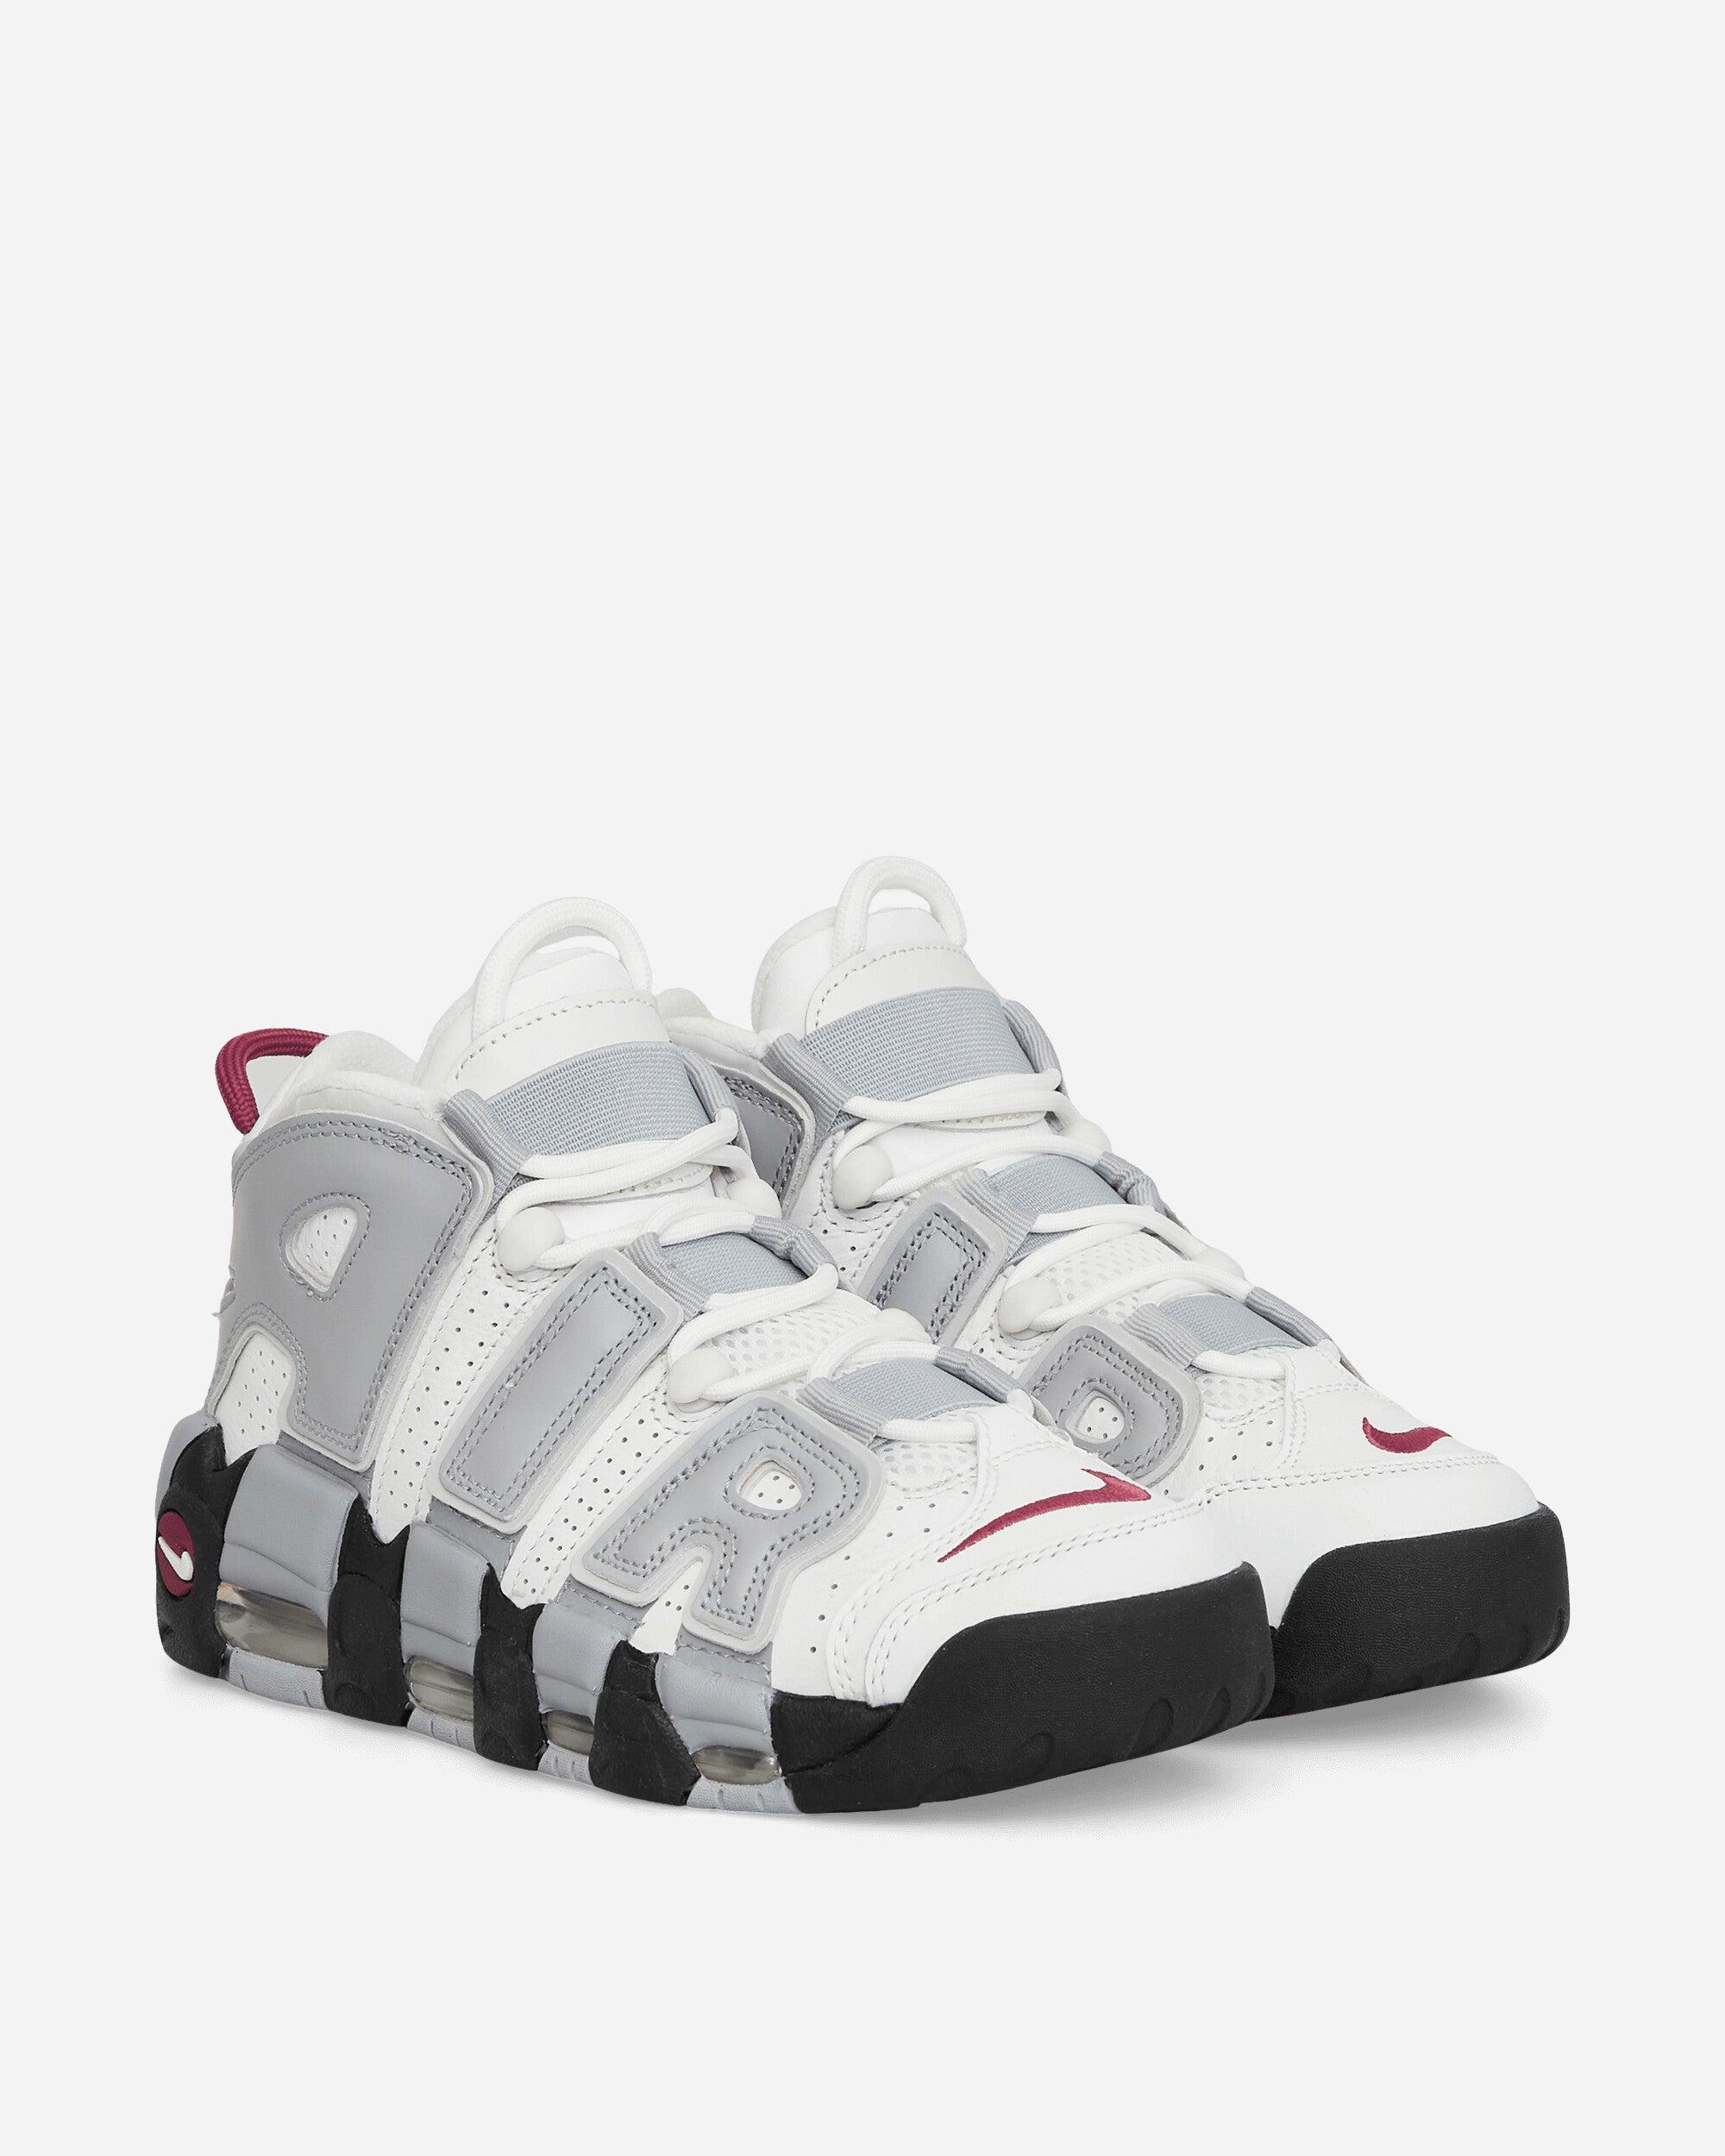 Nike Air More Uptempo Leather High-top Trainers in White | Lyst